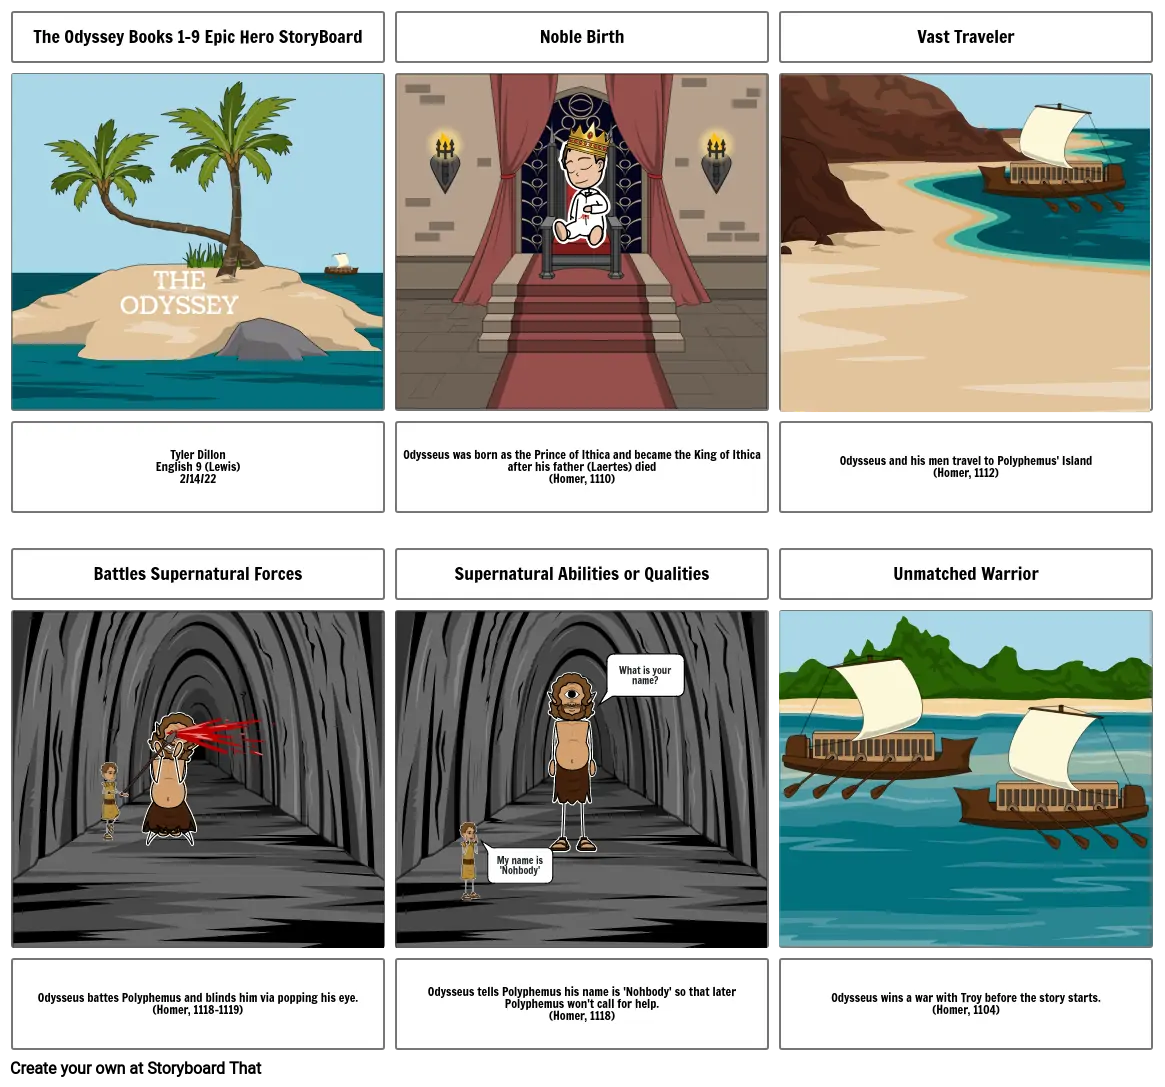 (Tyler D.) Period 5 - Storyboard The Odyssey Epic Hero